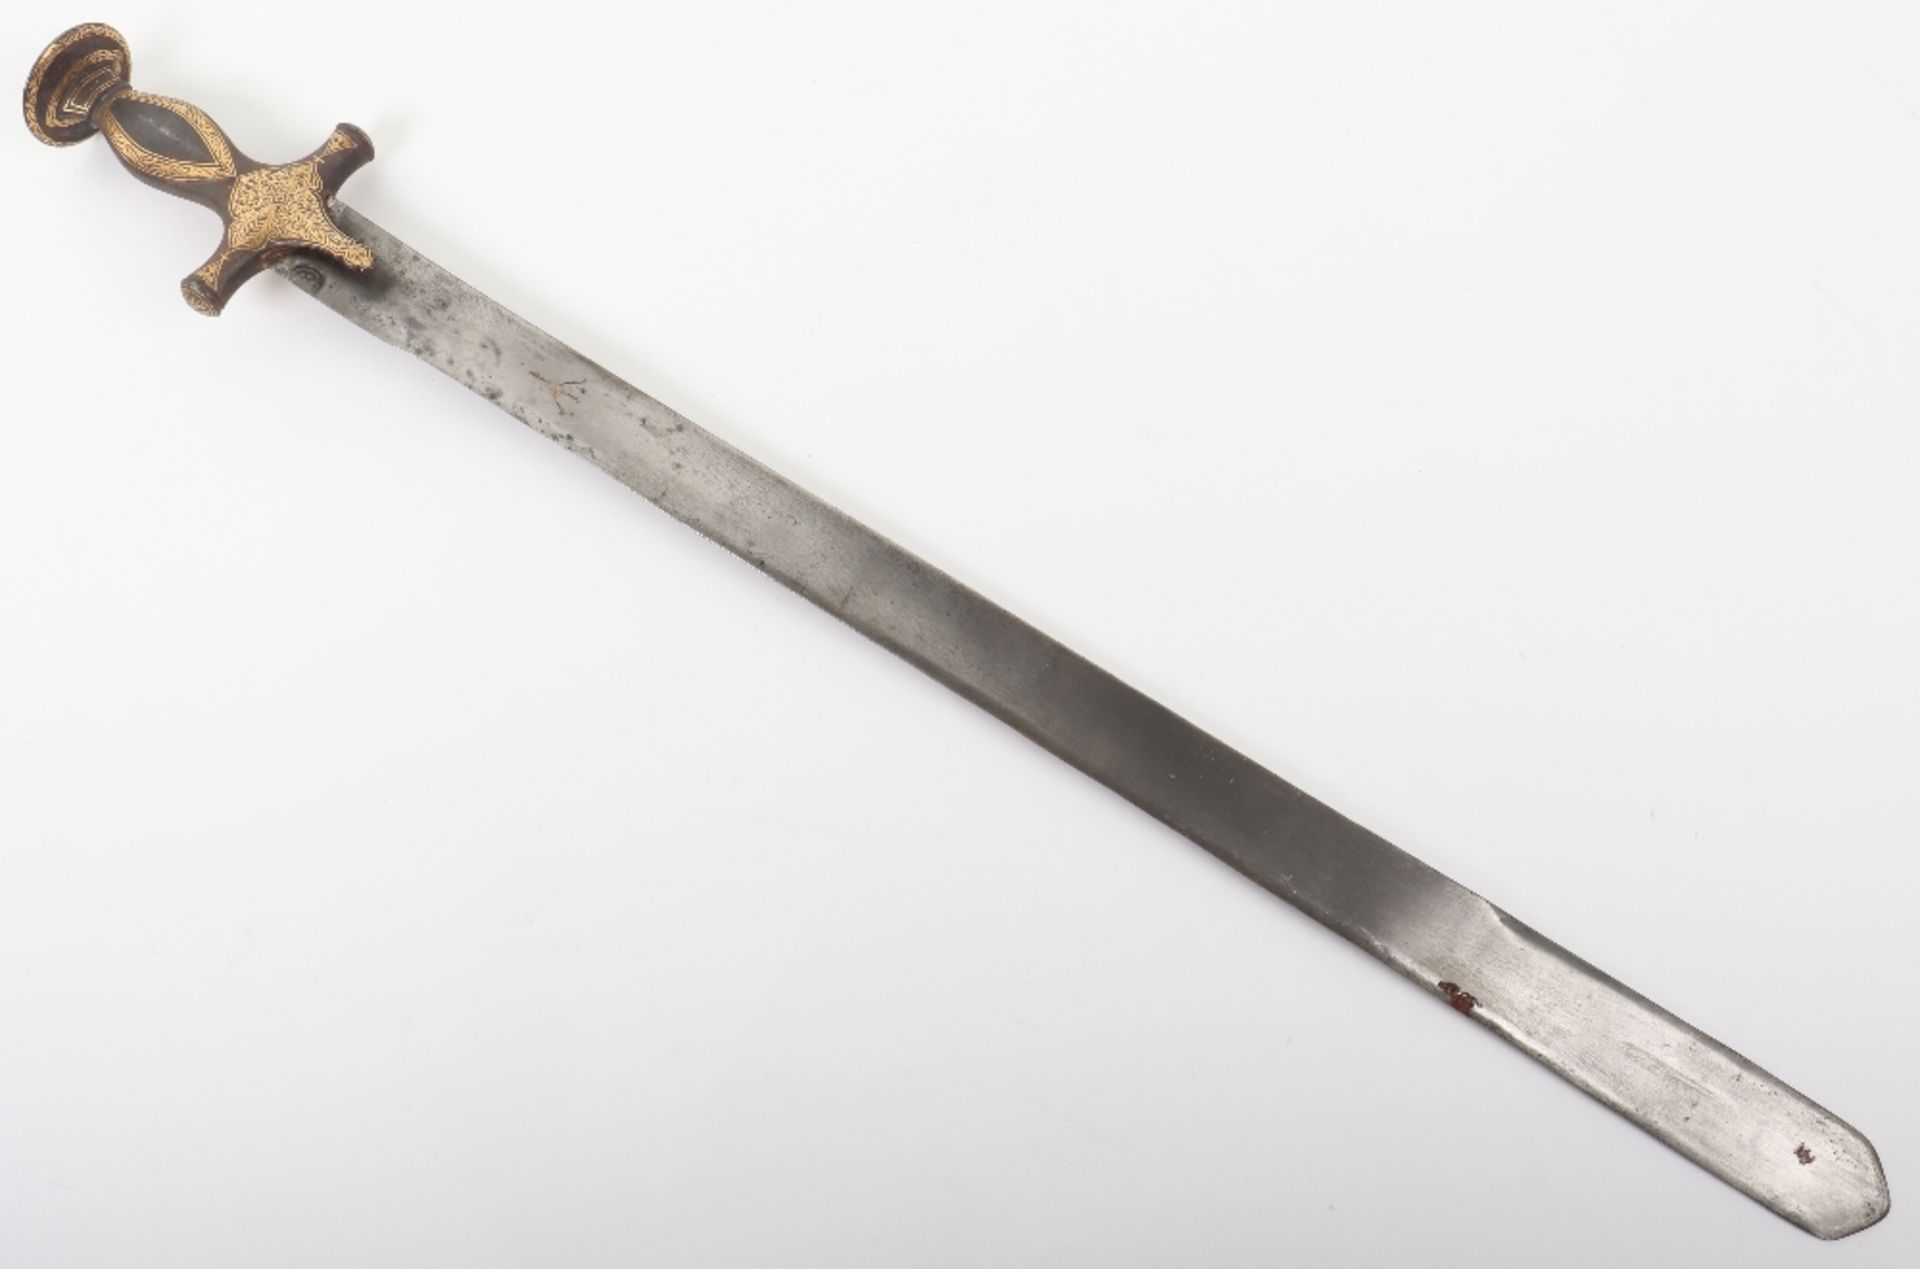 Decorative Indian Sword Tulwar Perhaps for a Youth - Image 12 of 13